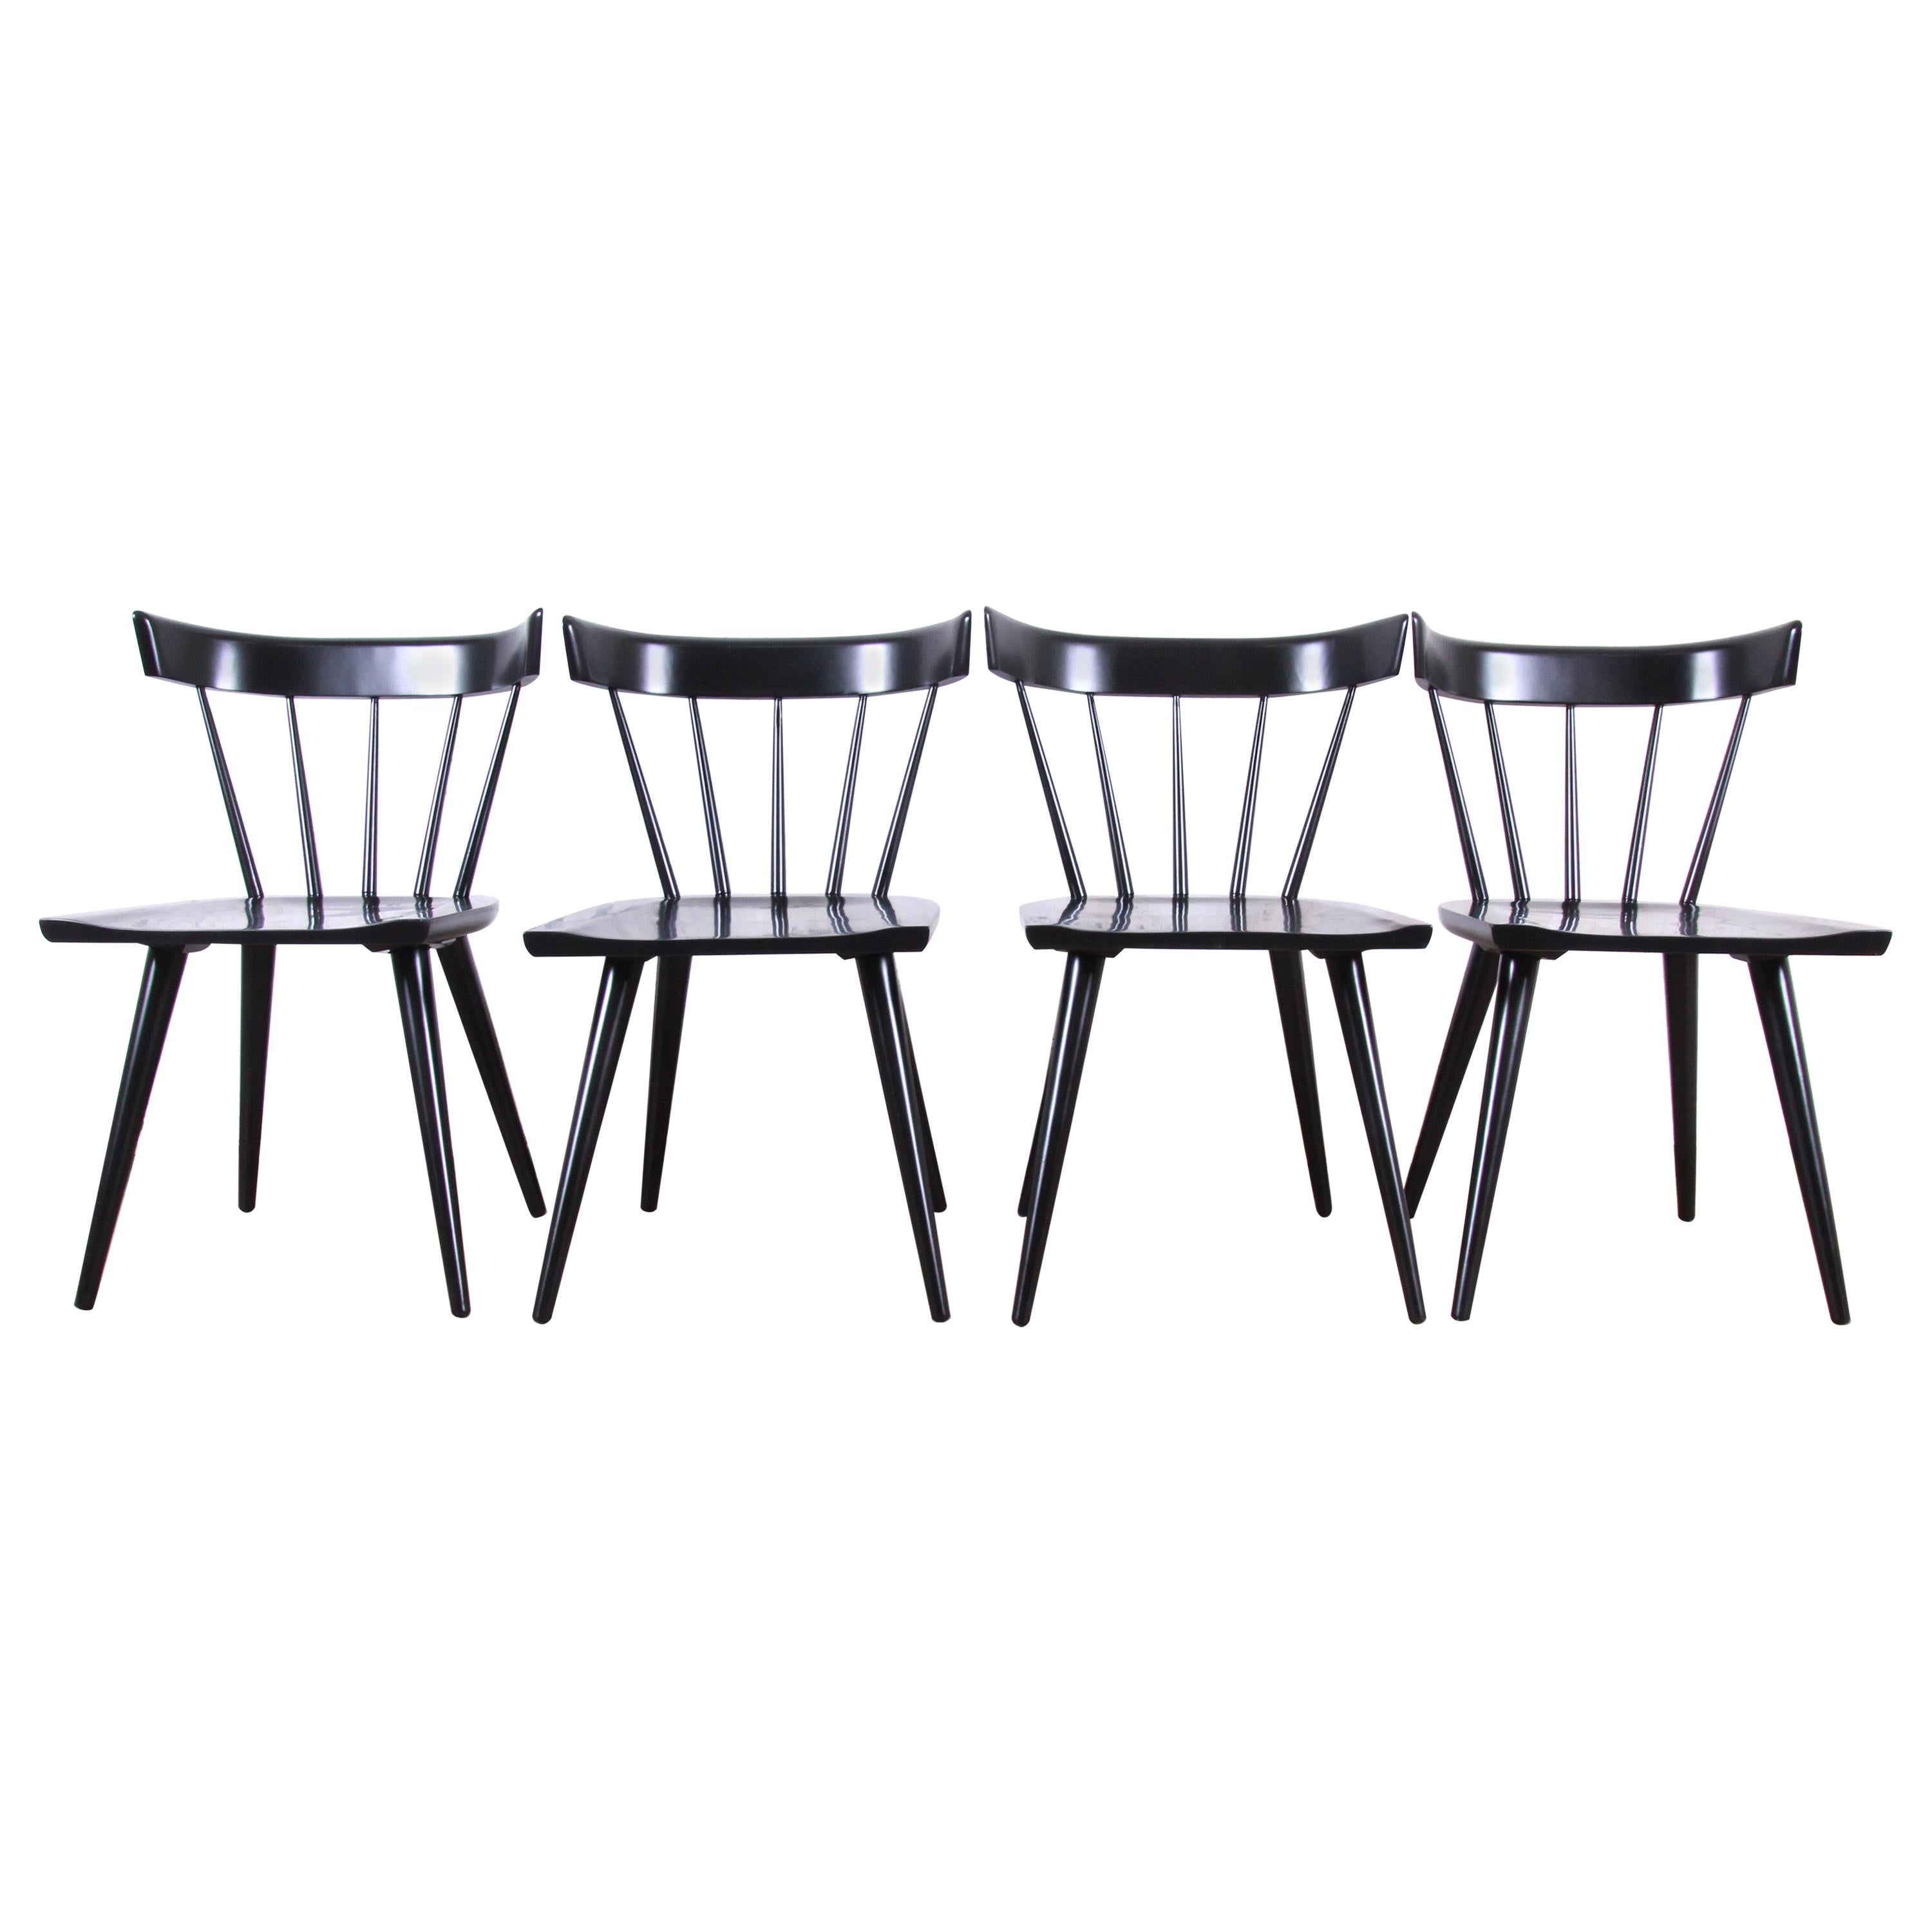 Paul McCobb Planner Group Black Lacquered Spindle Back Dining Chairs, Set of 4